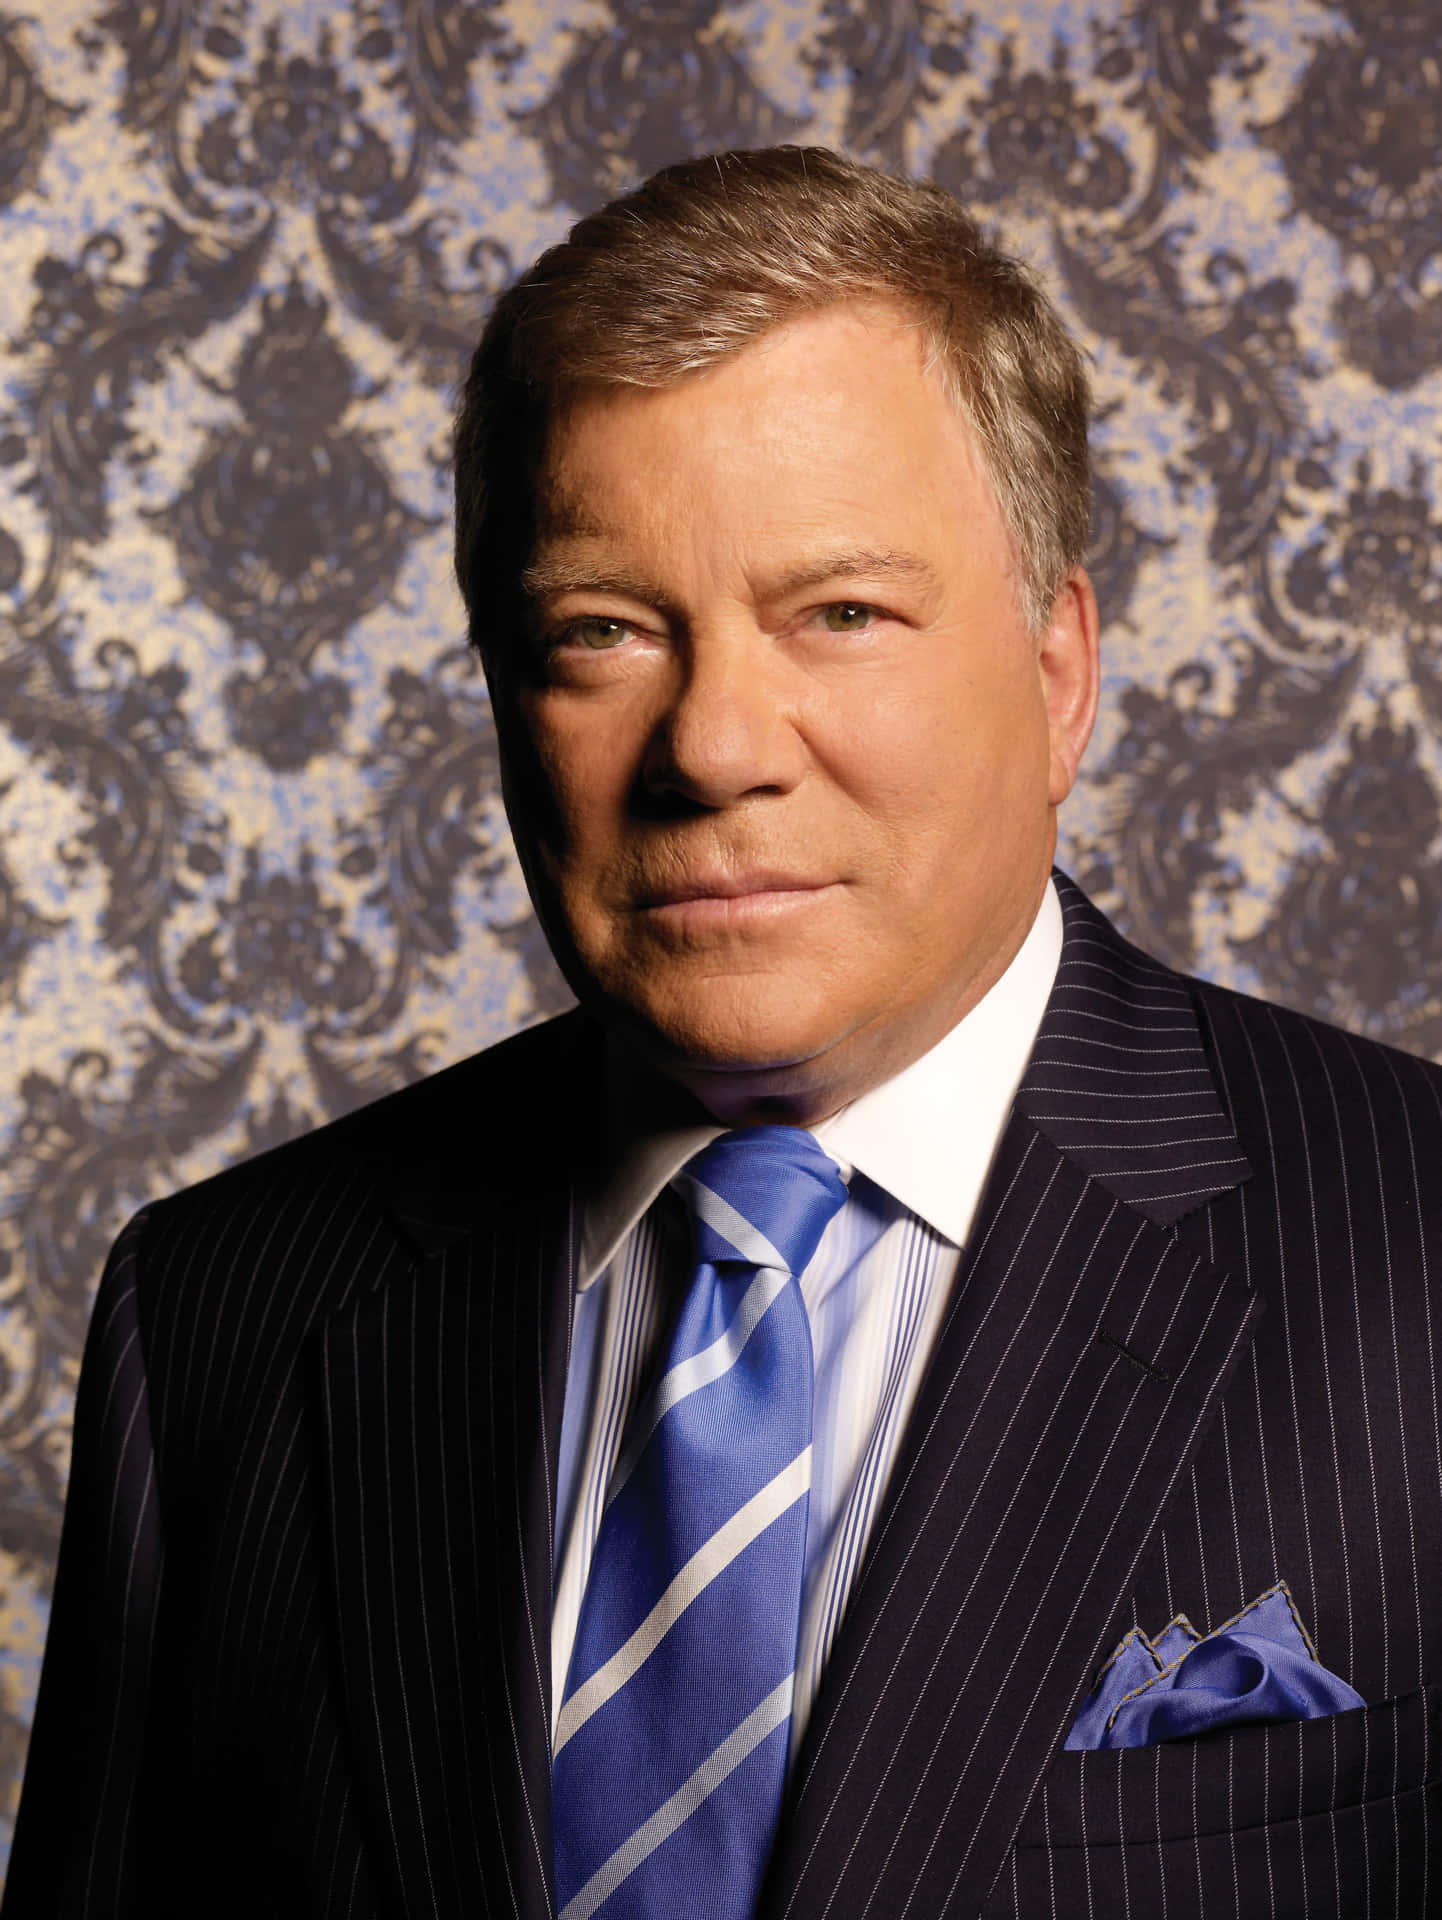 William Shatner Poses For A Professional Portrait